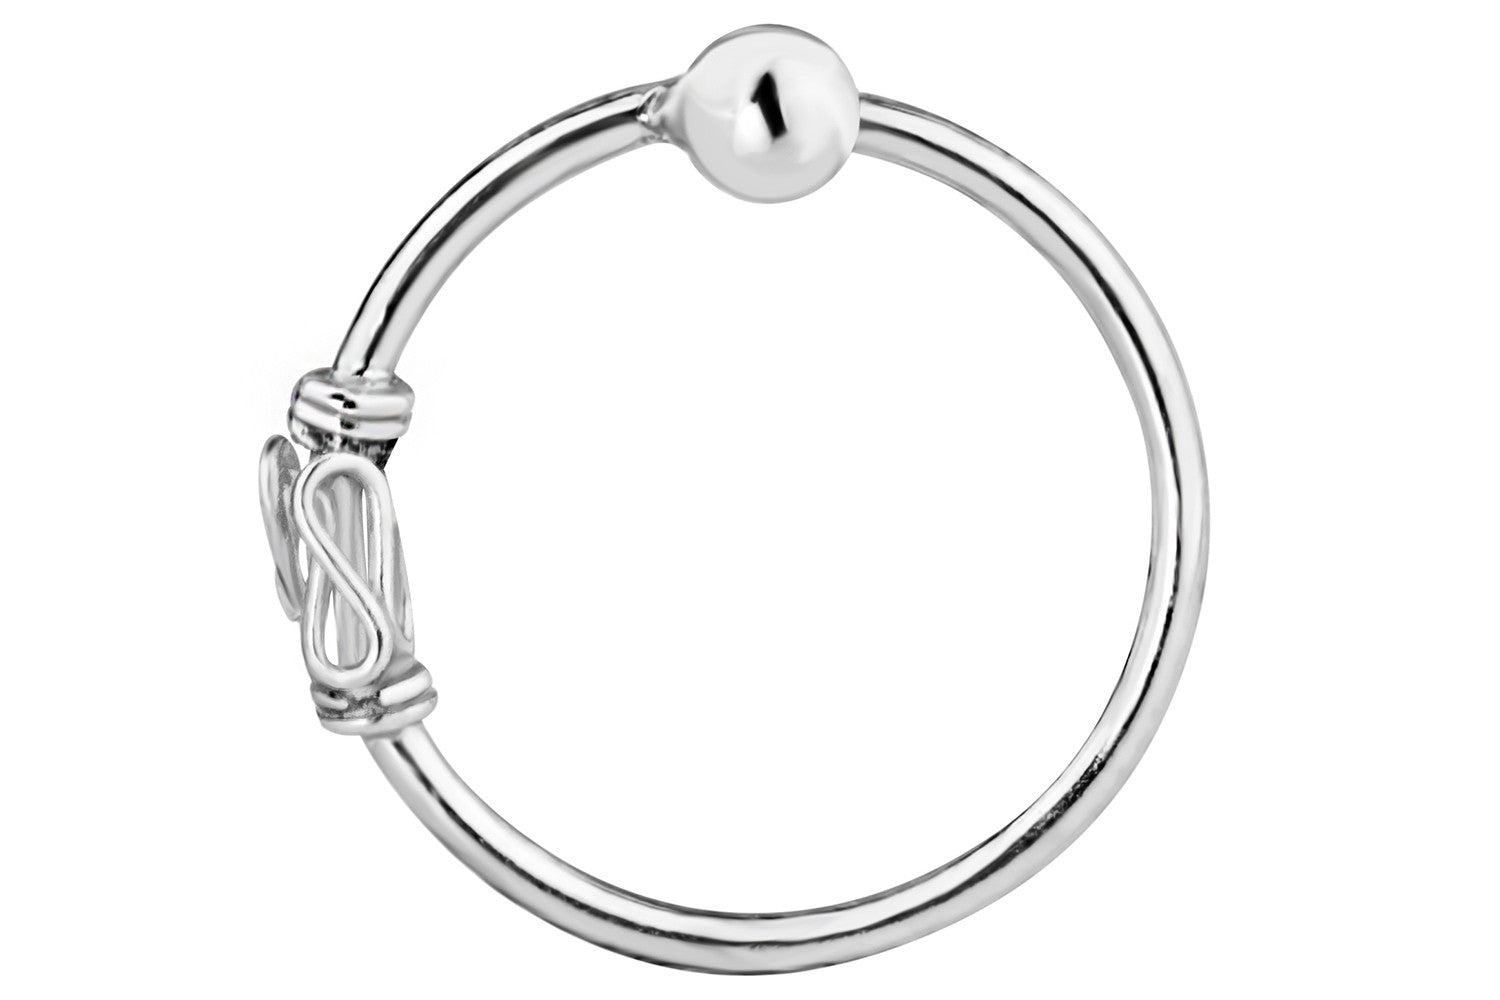 This 20g nose hoop is made with .925 Sterling Silver and features a unique Balinese design. Our one-side-fixed ball closure design is easy to use and secure. Simply un-fix one side of the ring and insert the ring into the piercing. Once the ring is in place, affix the wire back into the ball.